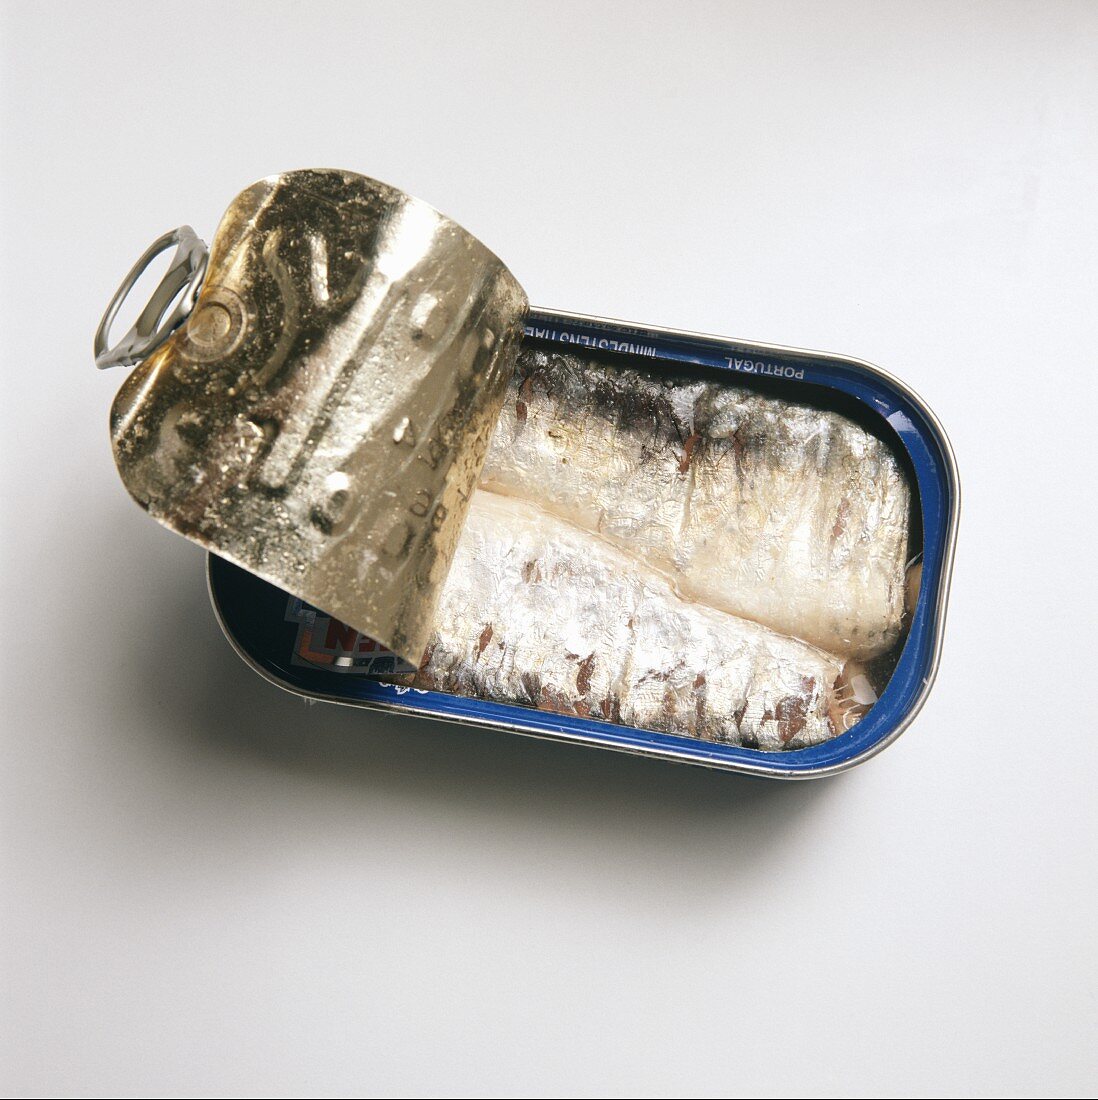 Sardines in a Partially Opened Can